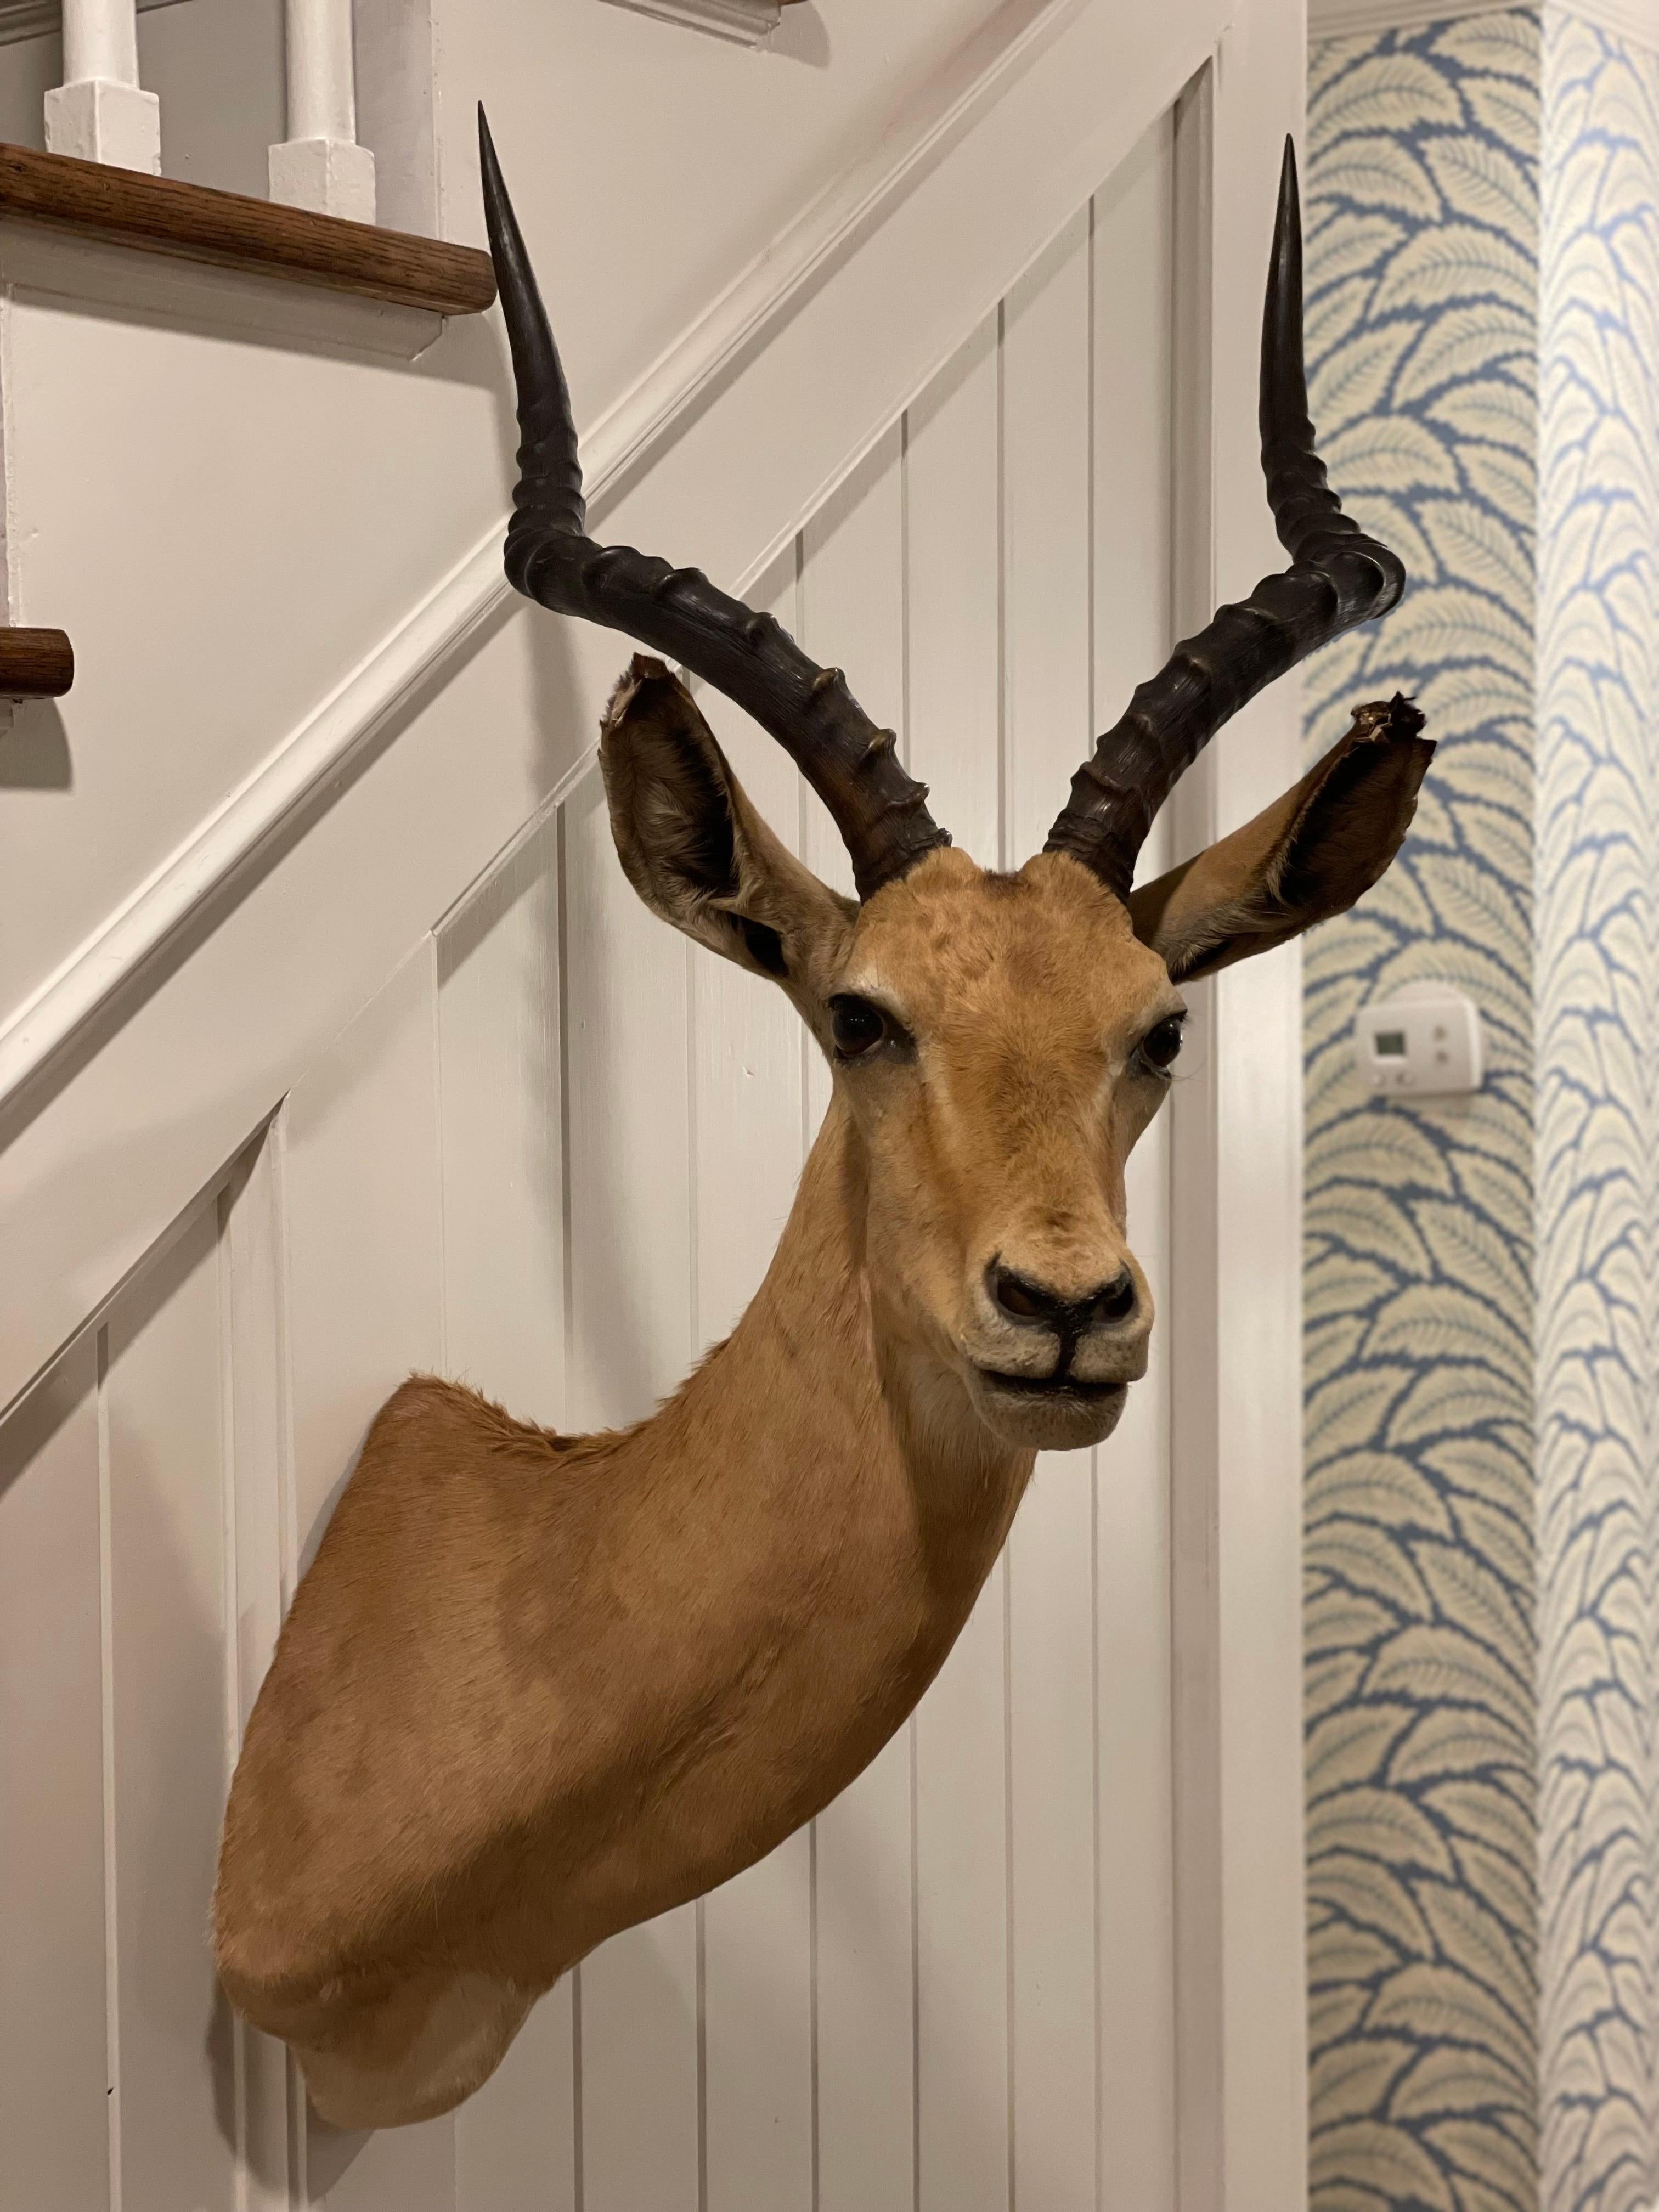 Large Vintage Gorgeous Mid-Century 1960's African Impala Taxidermy Head and Shoulder Wall Mount. 

Card on the Back of the mount says the African Impala was mounted in May 1968 by Frontier Taxidermists in Cheyenne, WY for Dr. Davis of Shawnee